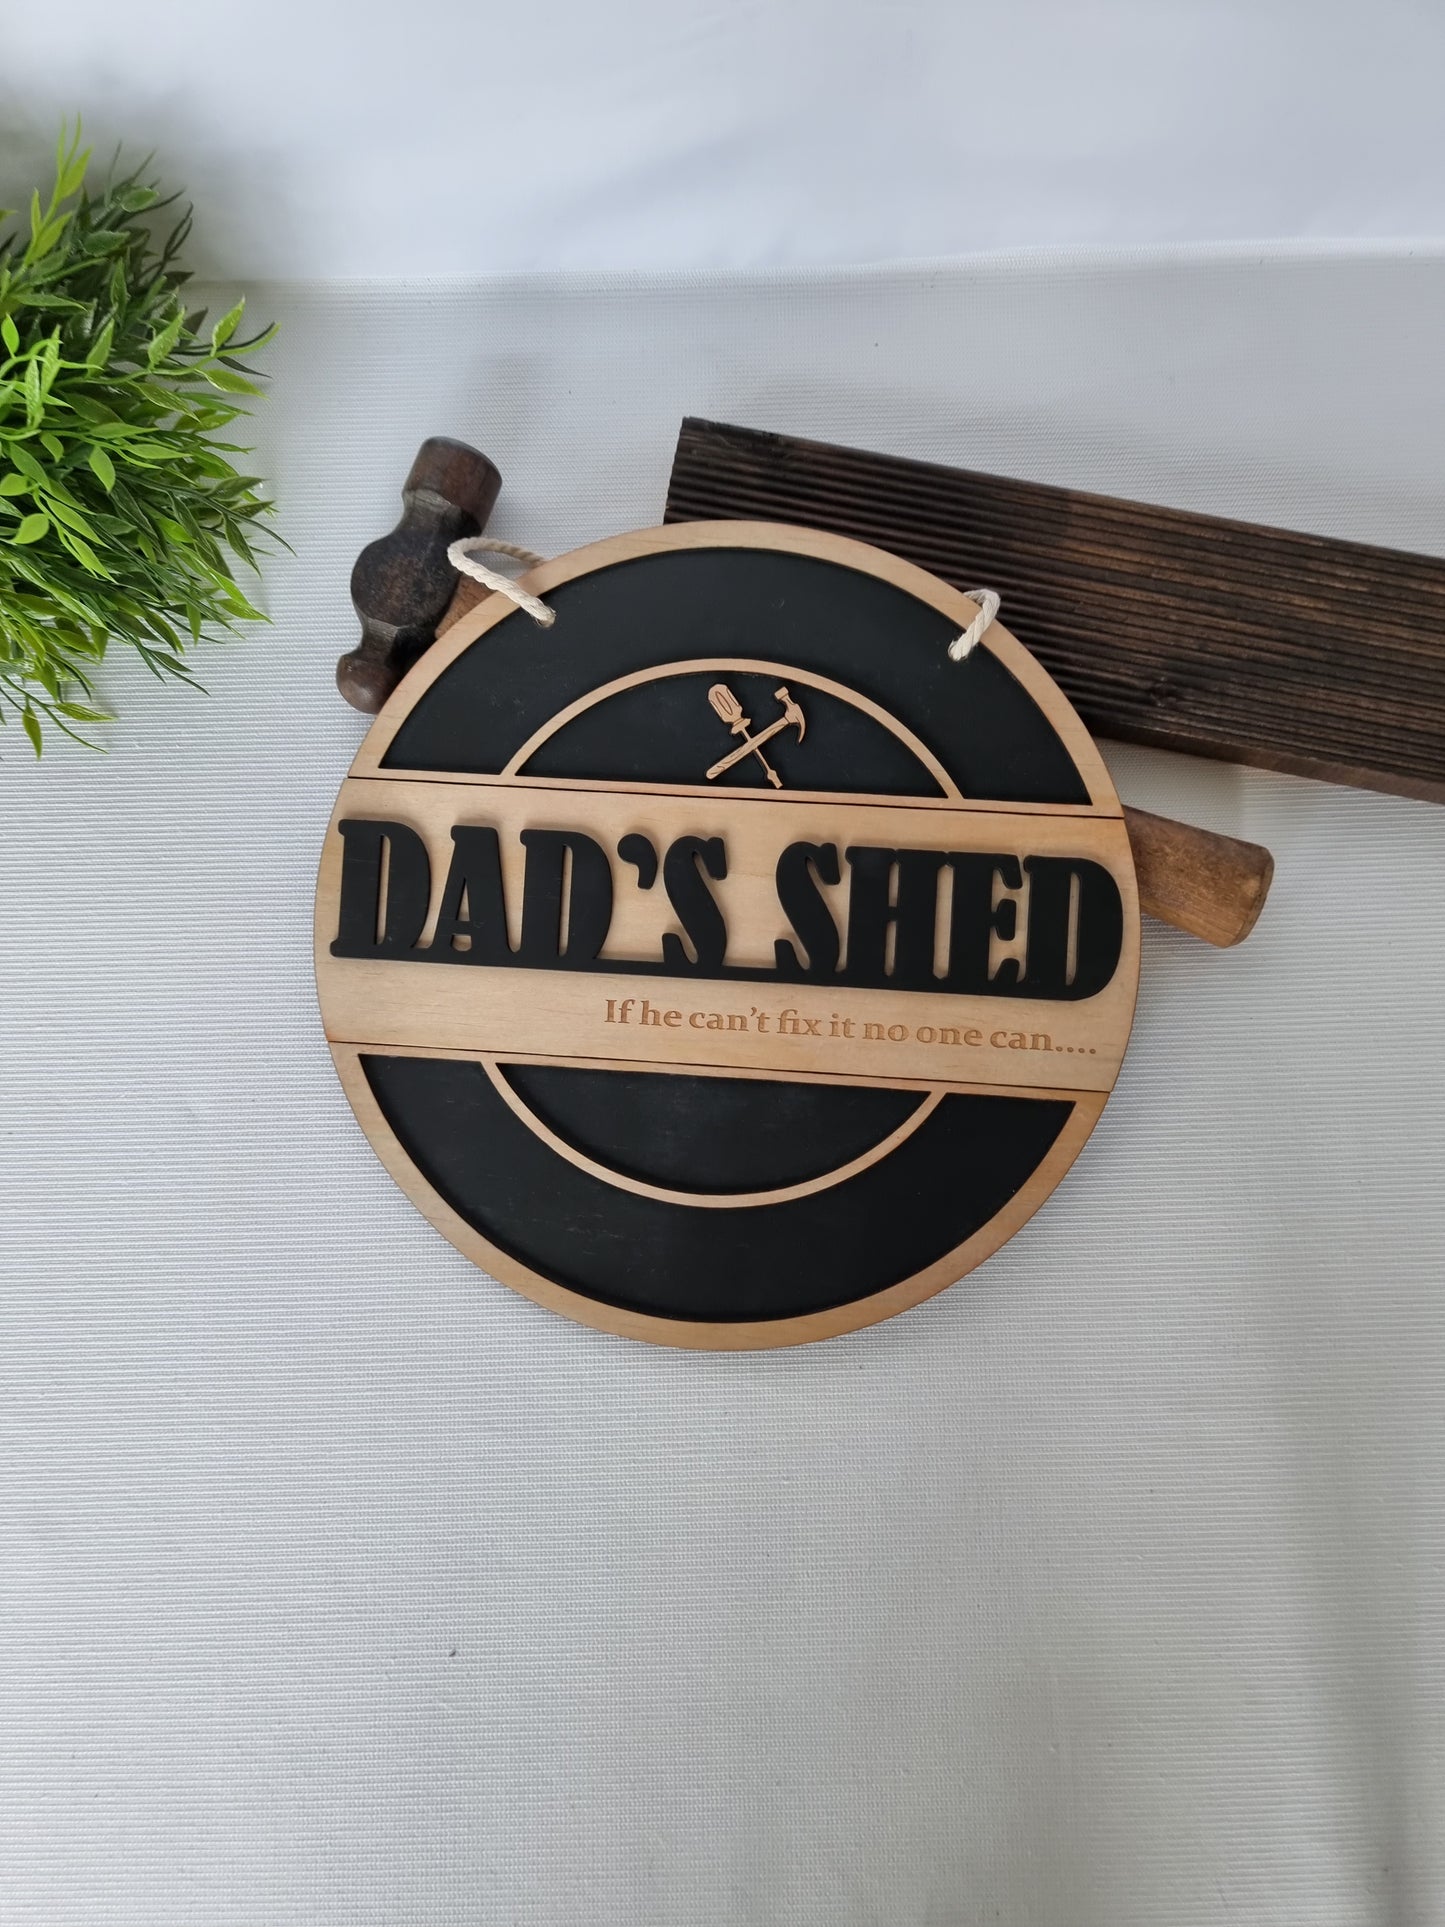 Dad's Shed Wooden Sign - If he can't fix it no one can...